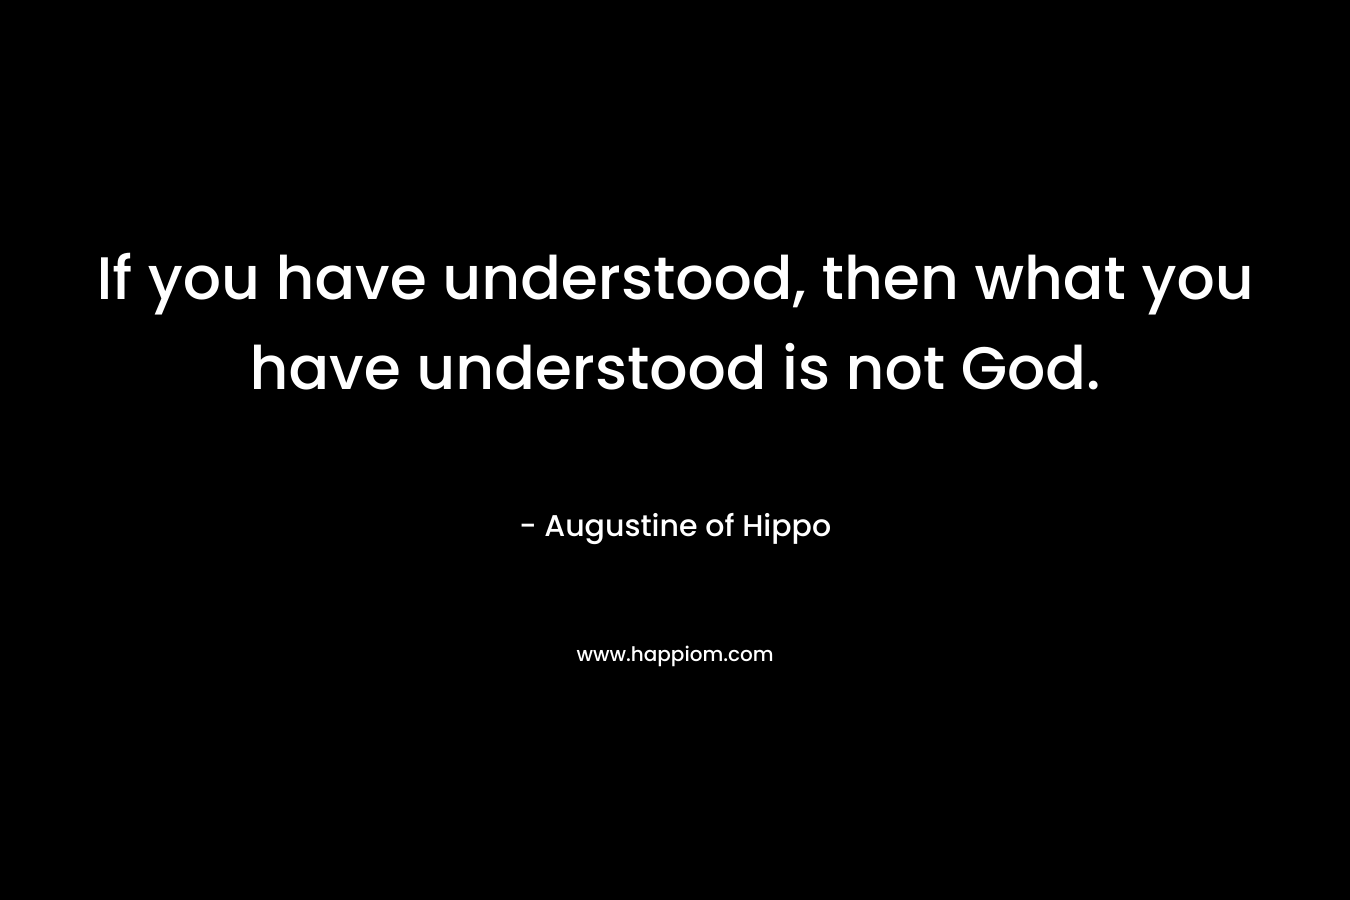 If you have understood, then what you have understood is not God.